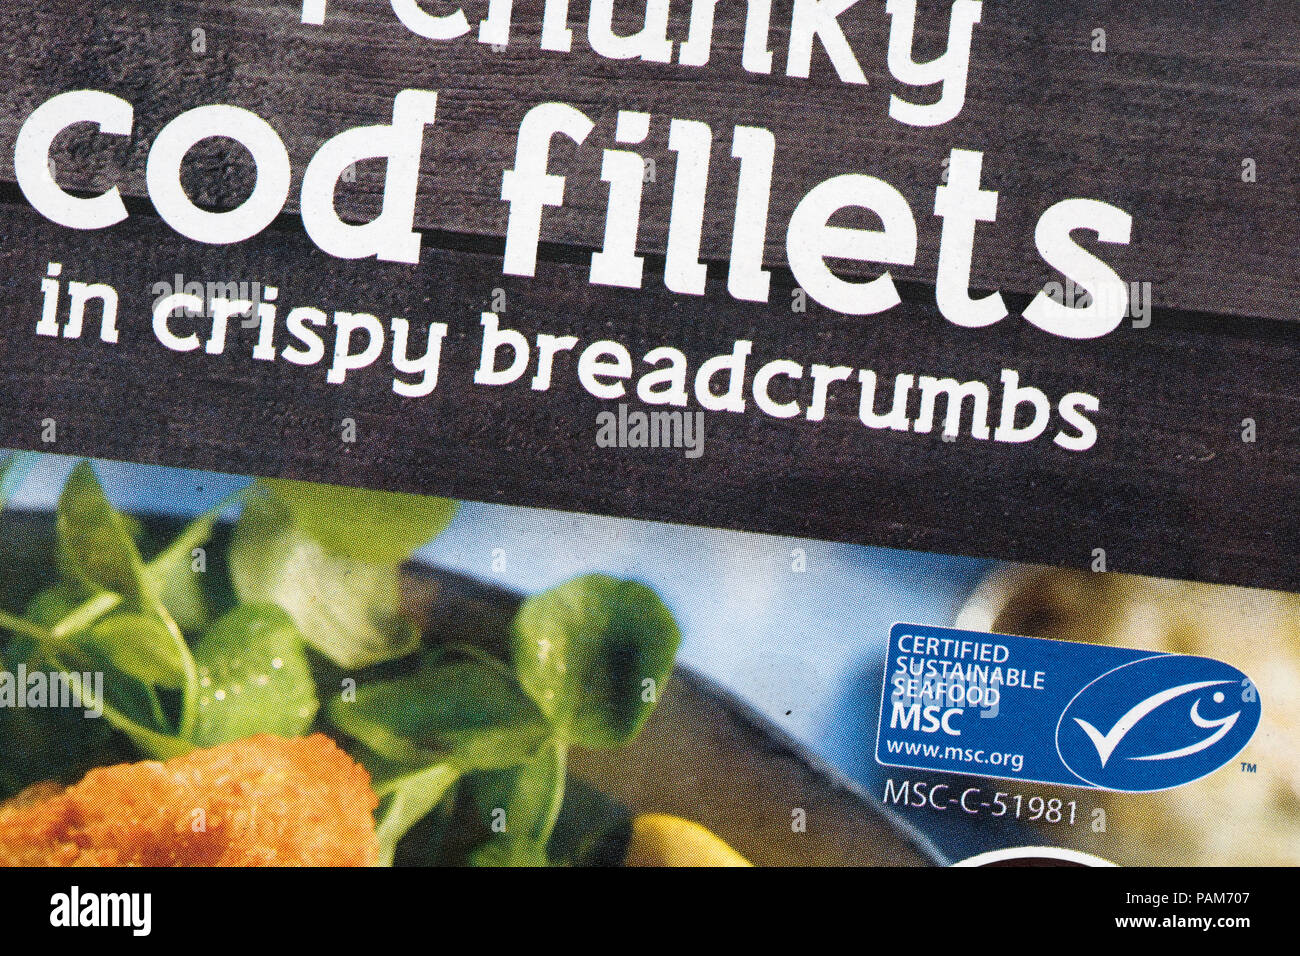 Cod fillets package with MSC certified sustainable food logo UK Stock Photo